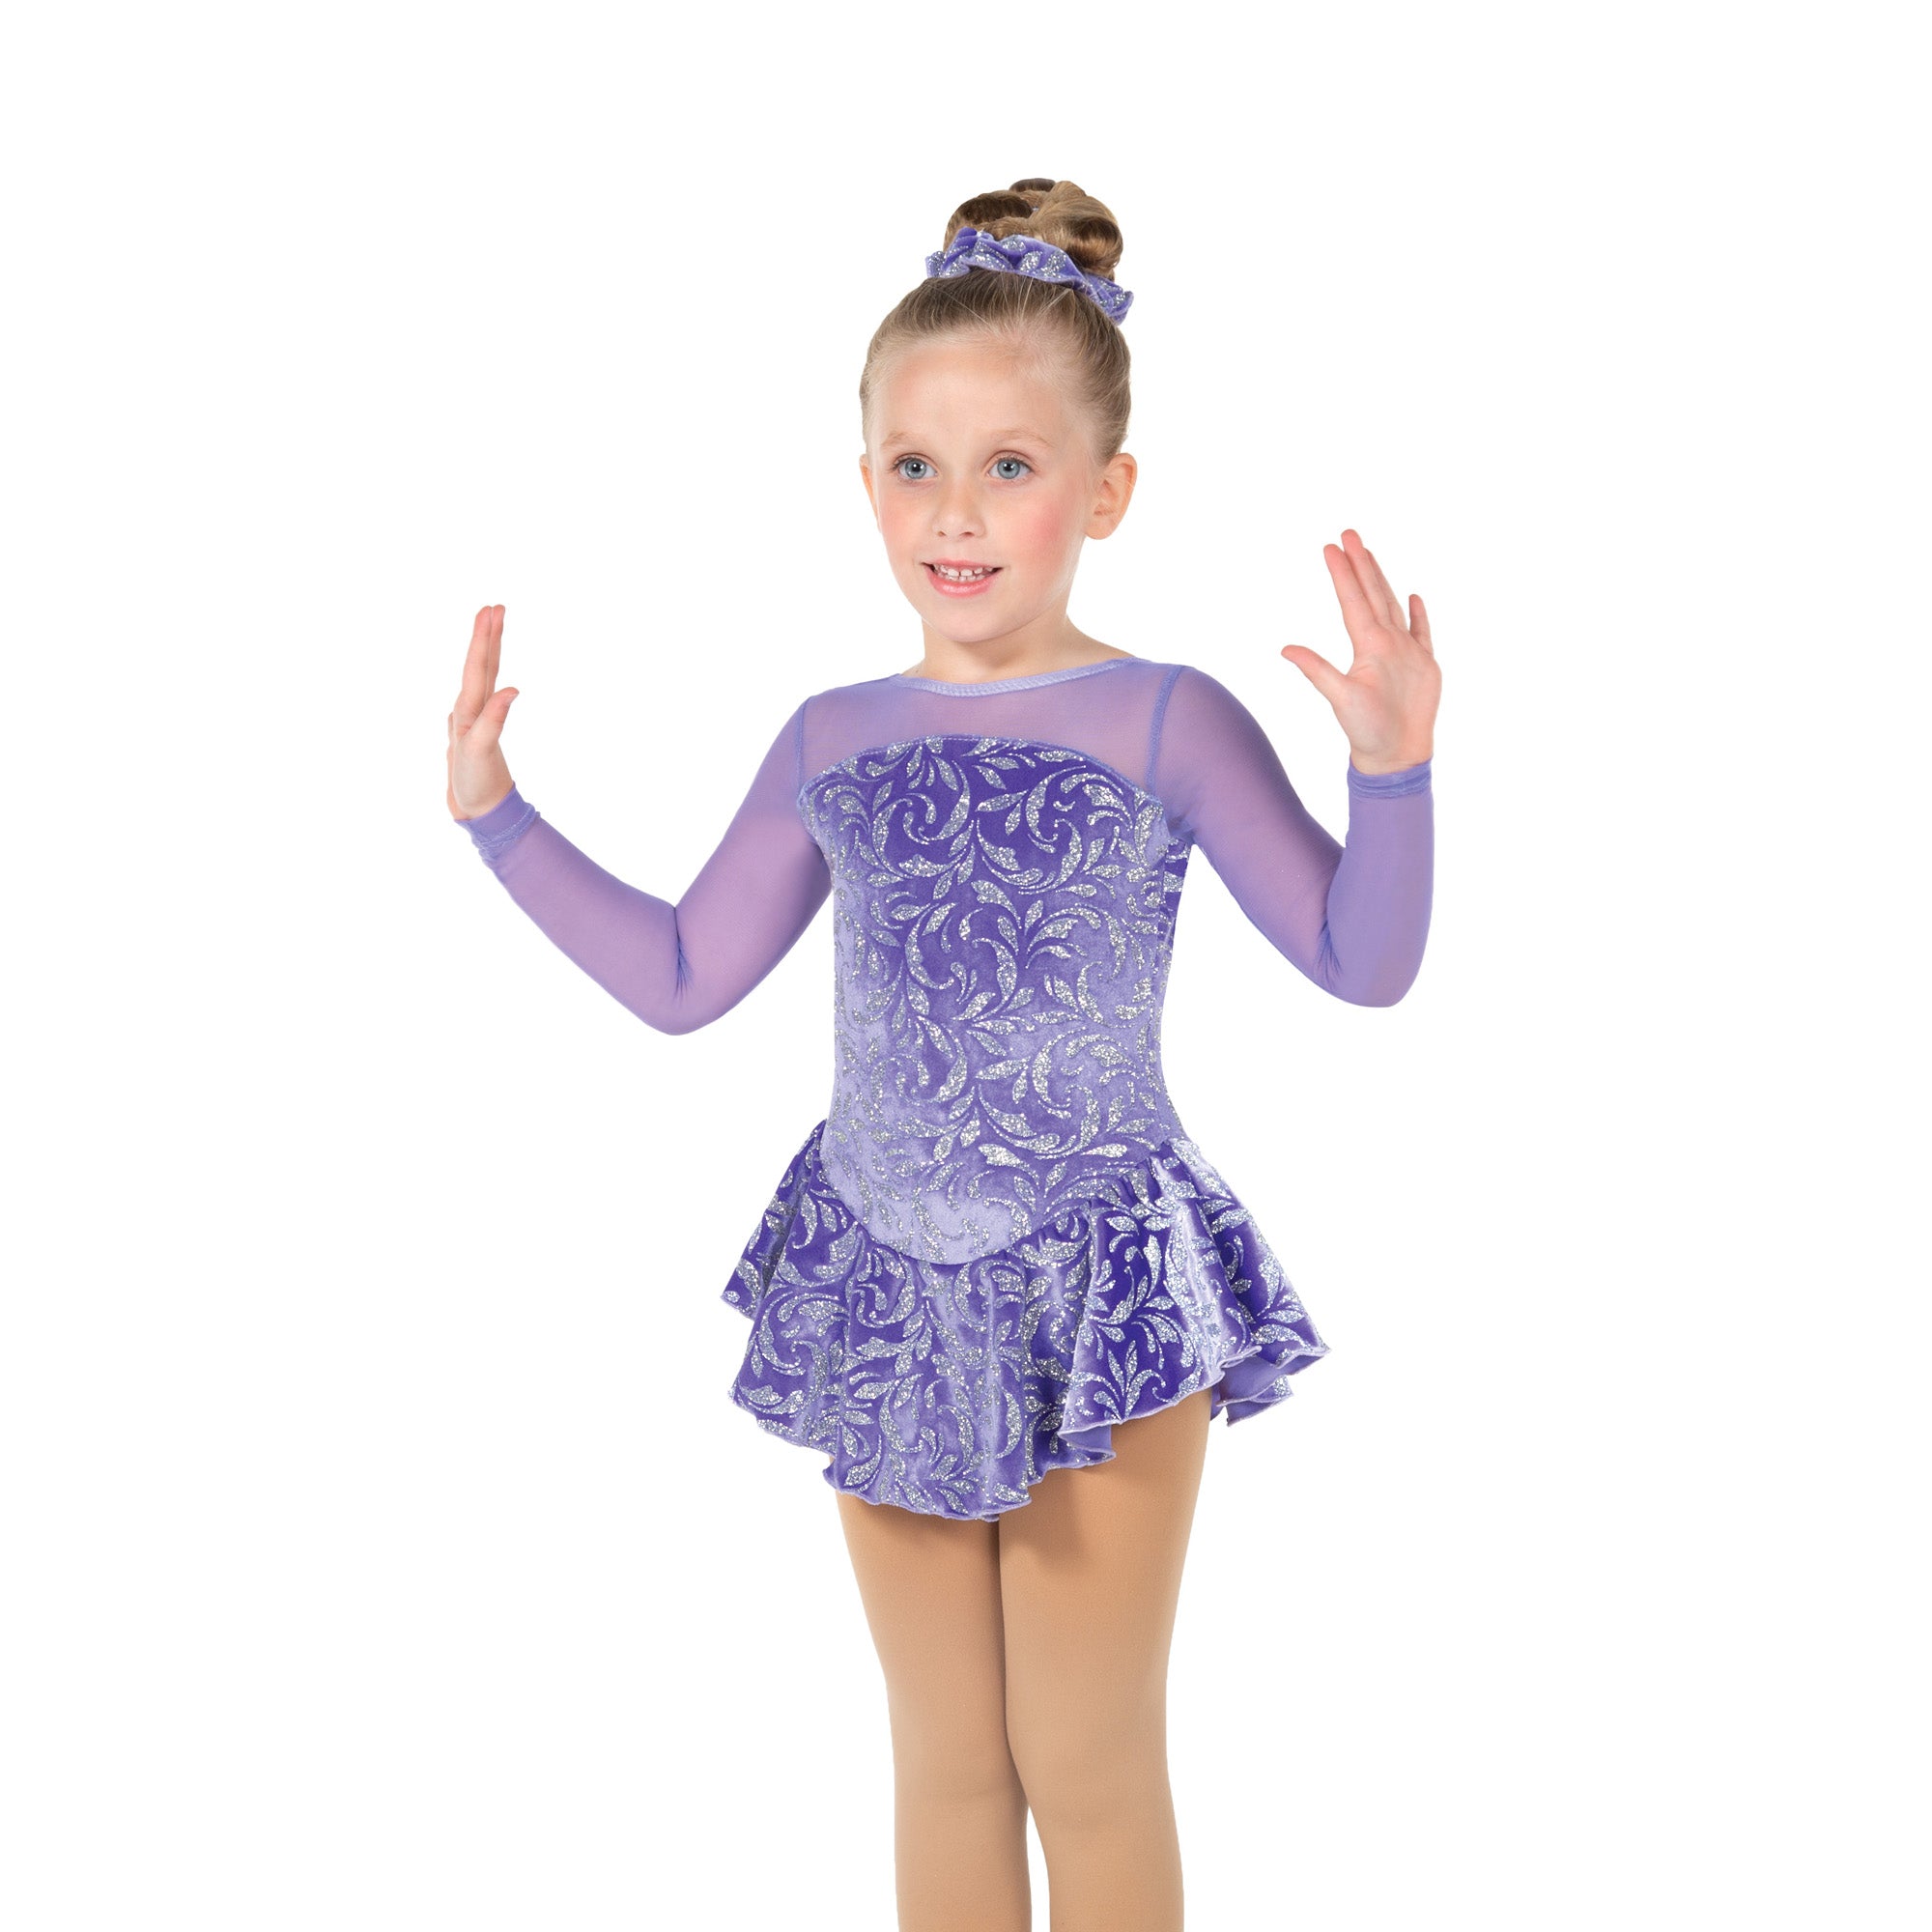 177 Ice Whirl Skating Dress in Purple by Jerry's